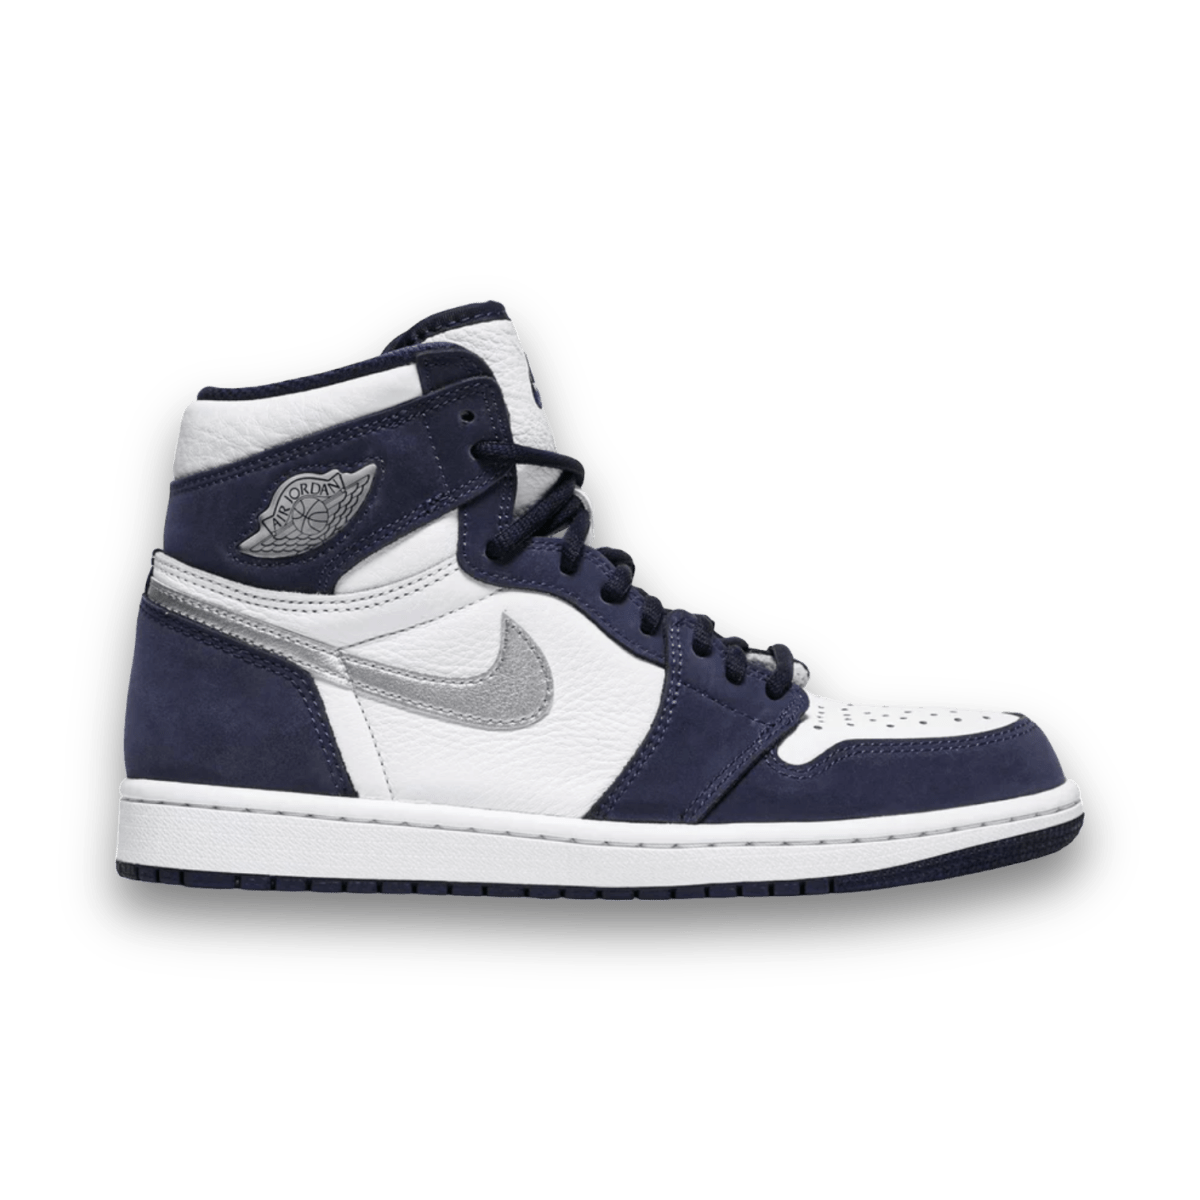 Laces for Lions Air Jordan 1 Retro High 'Midnight Navy' - High Sneaker - Jawns on Fire Sneakers & Streetwear